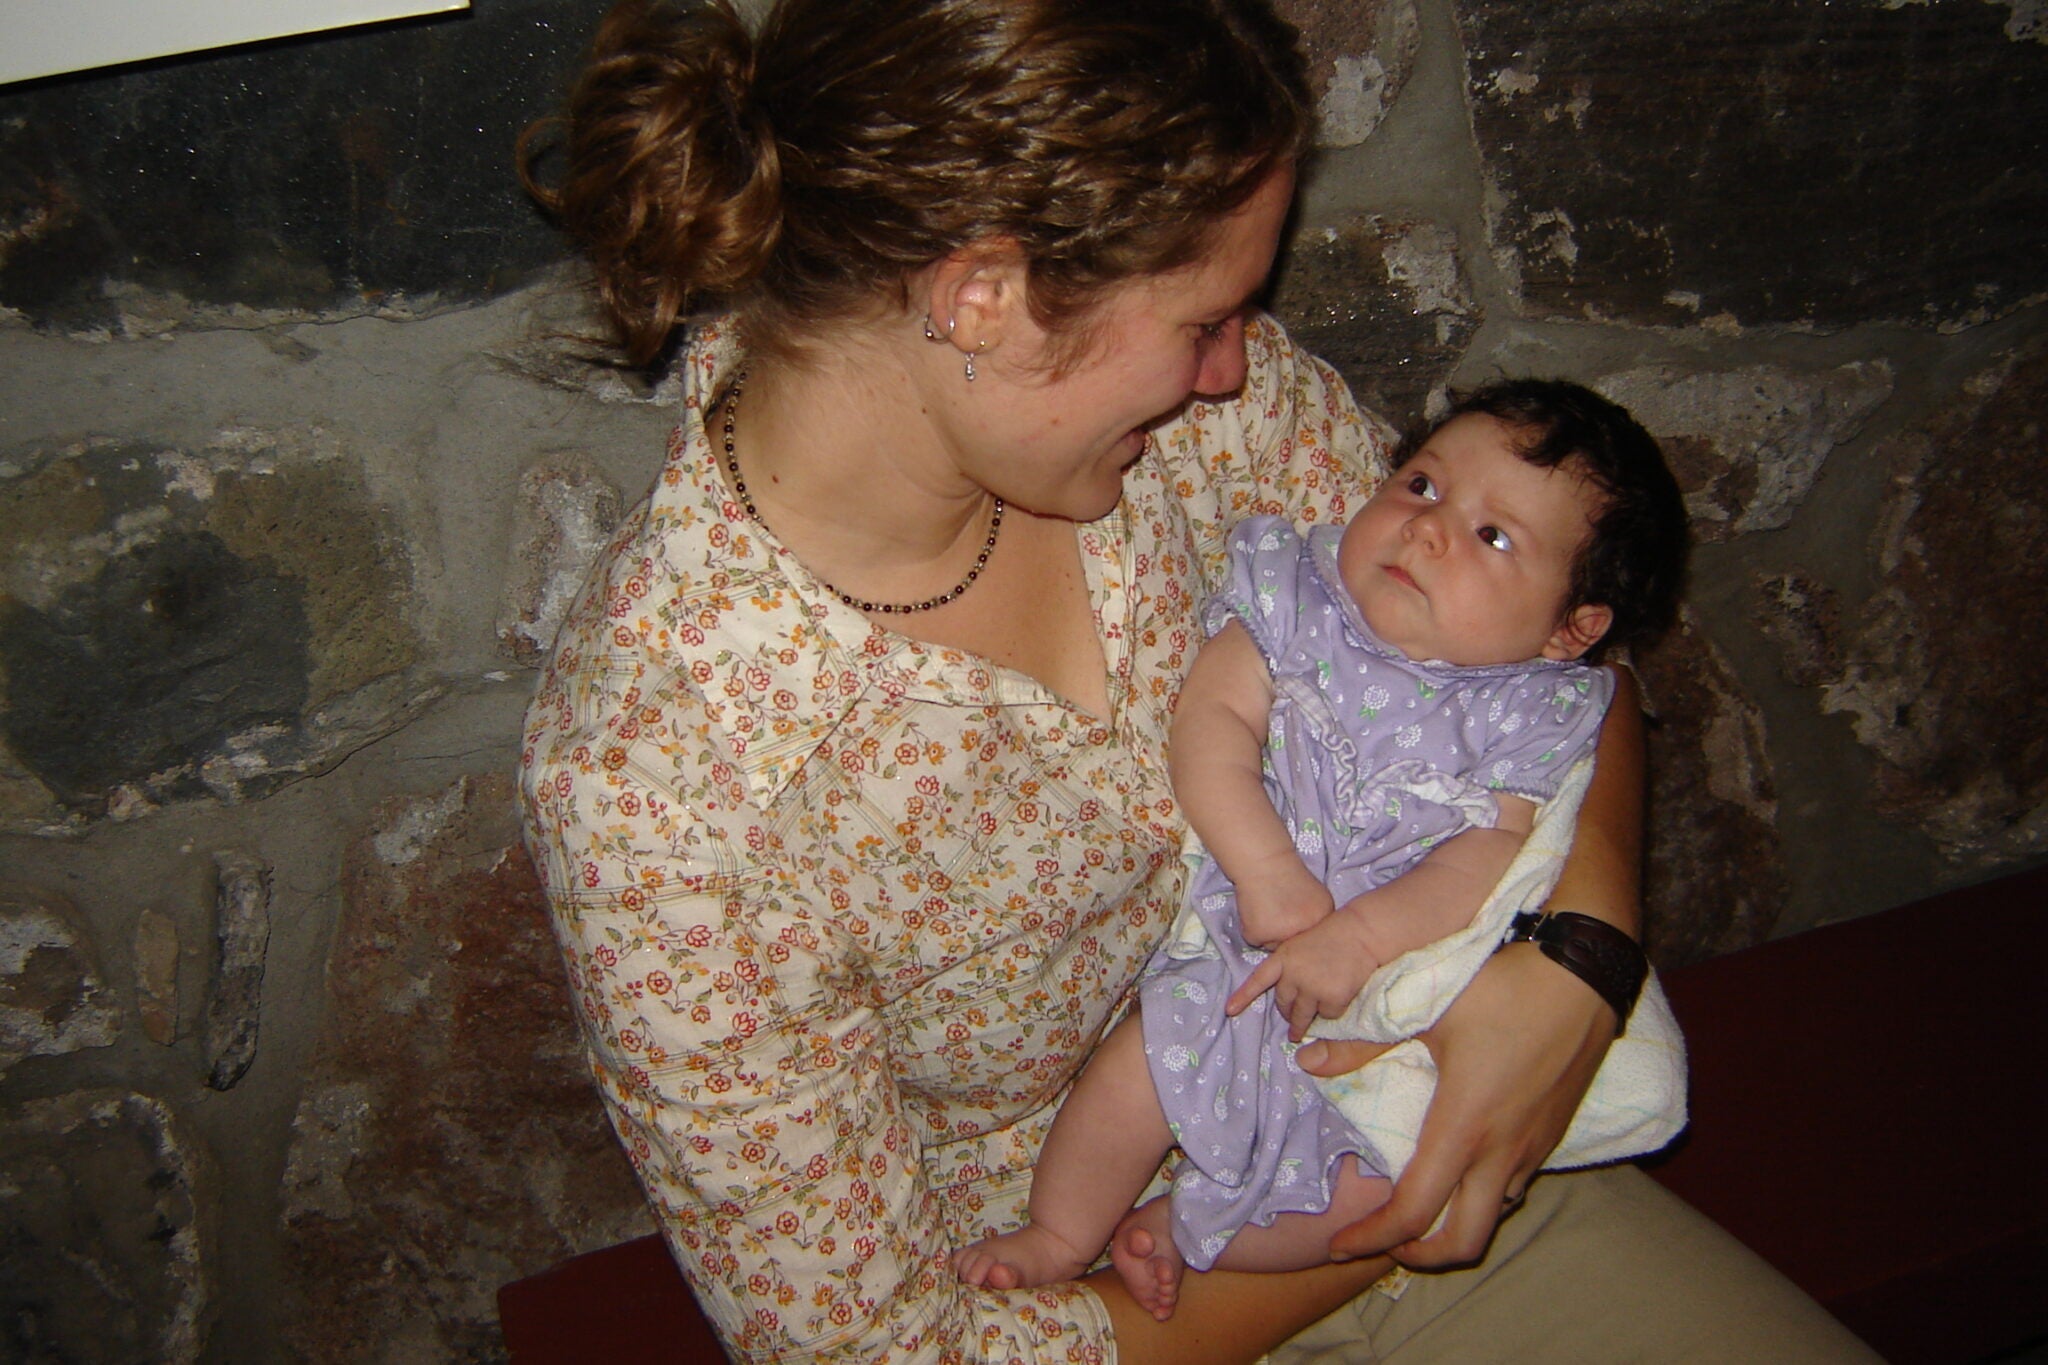 Bethany holds a young baby in Brubacher House